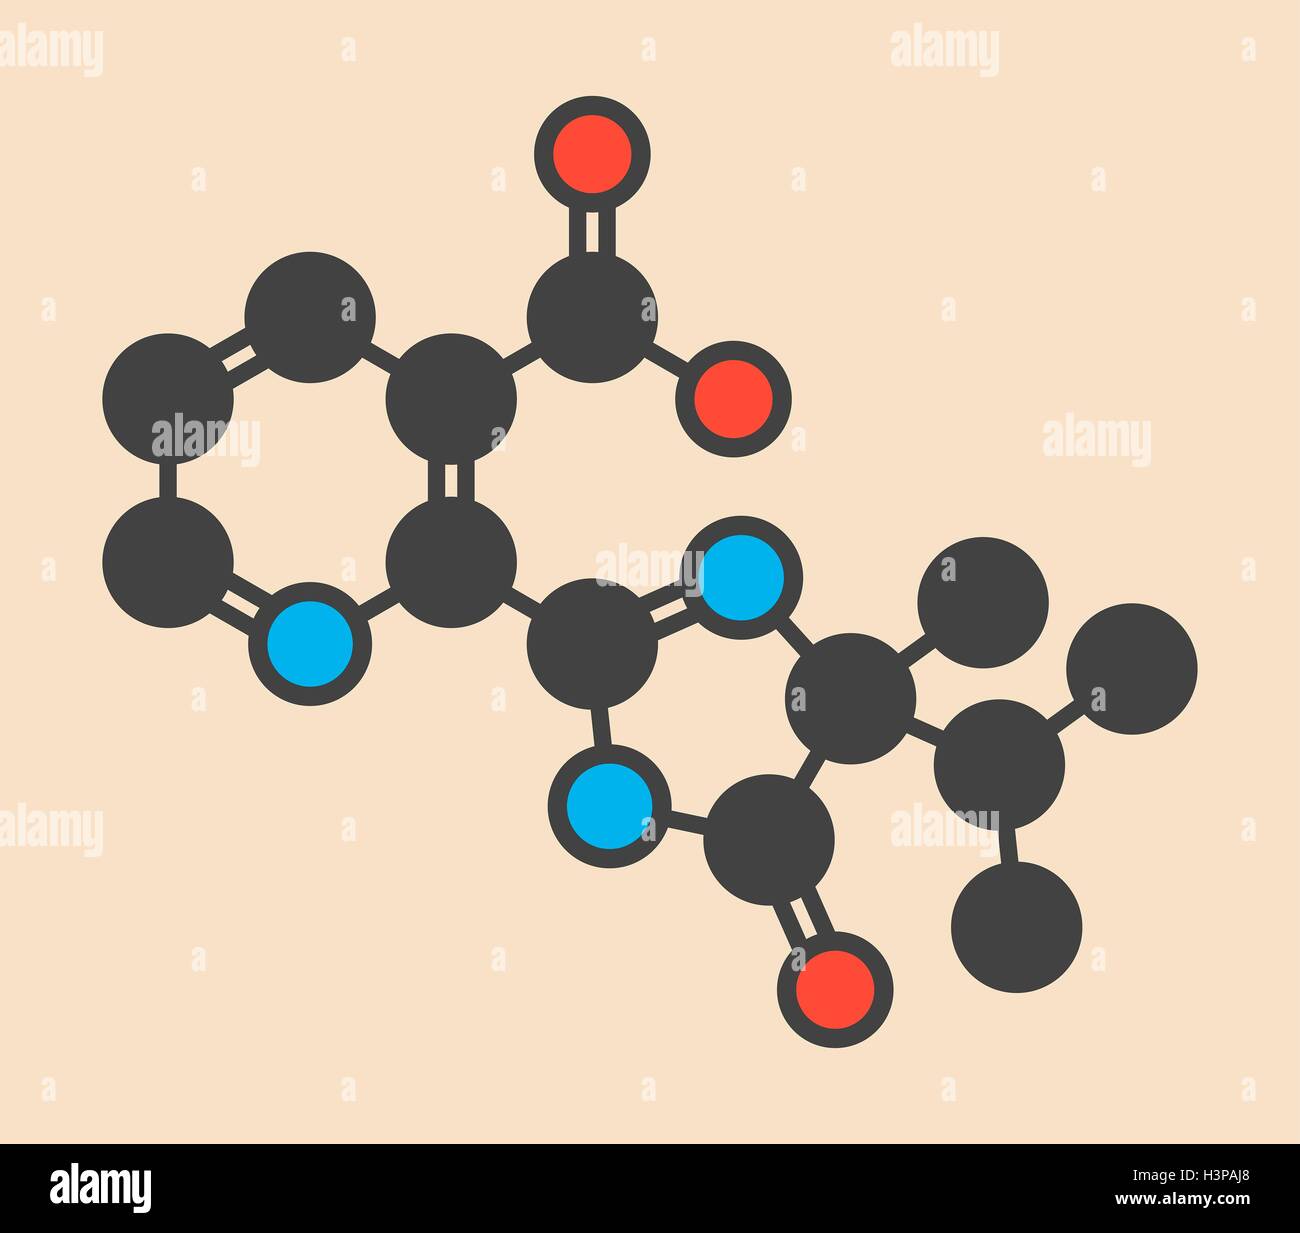 Imazapyr herbicide molecule. Stylized skeletal formula (chemical structure). Atoms are shown as color-coded circles: hydrogen (hidden), carbon (grey), nitrogen (blue), oxygen (red). Stock Photo